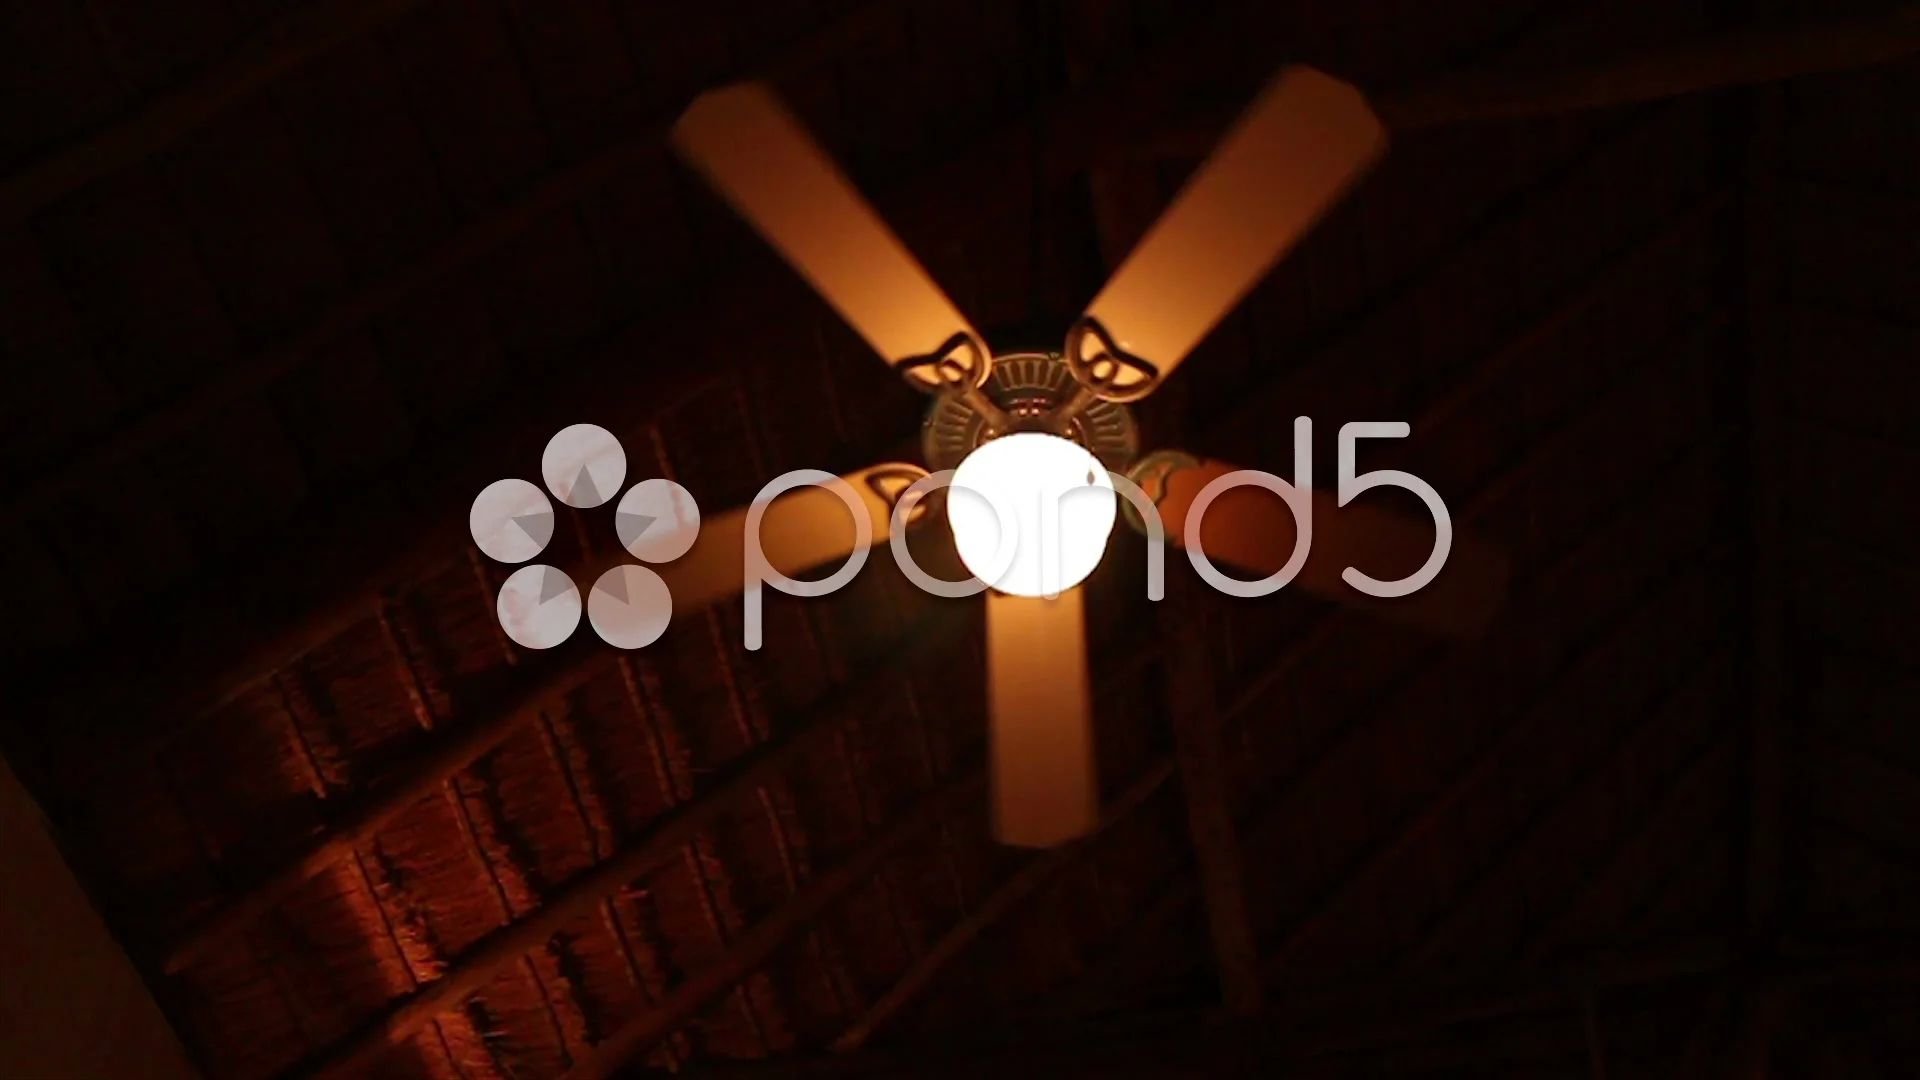 Ceiling Fan At Night Slowmotion Stock Video 34316980